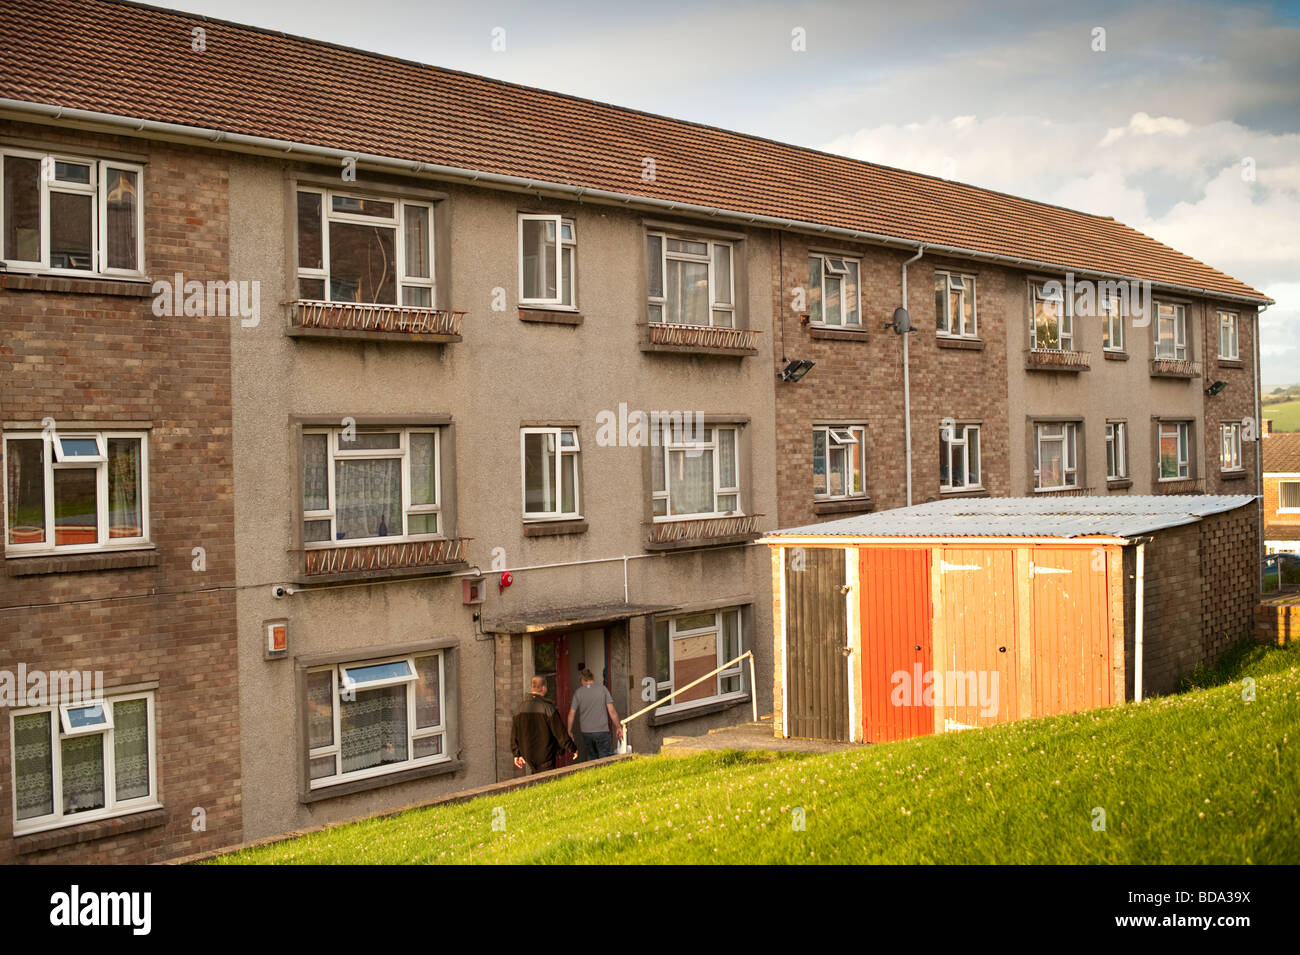 Blocks of local authority Council flats social housing Aberystwyth Wales UK Stock Photo